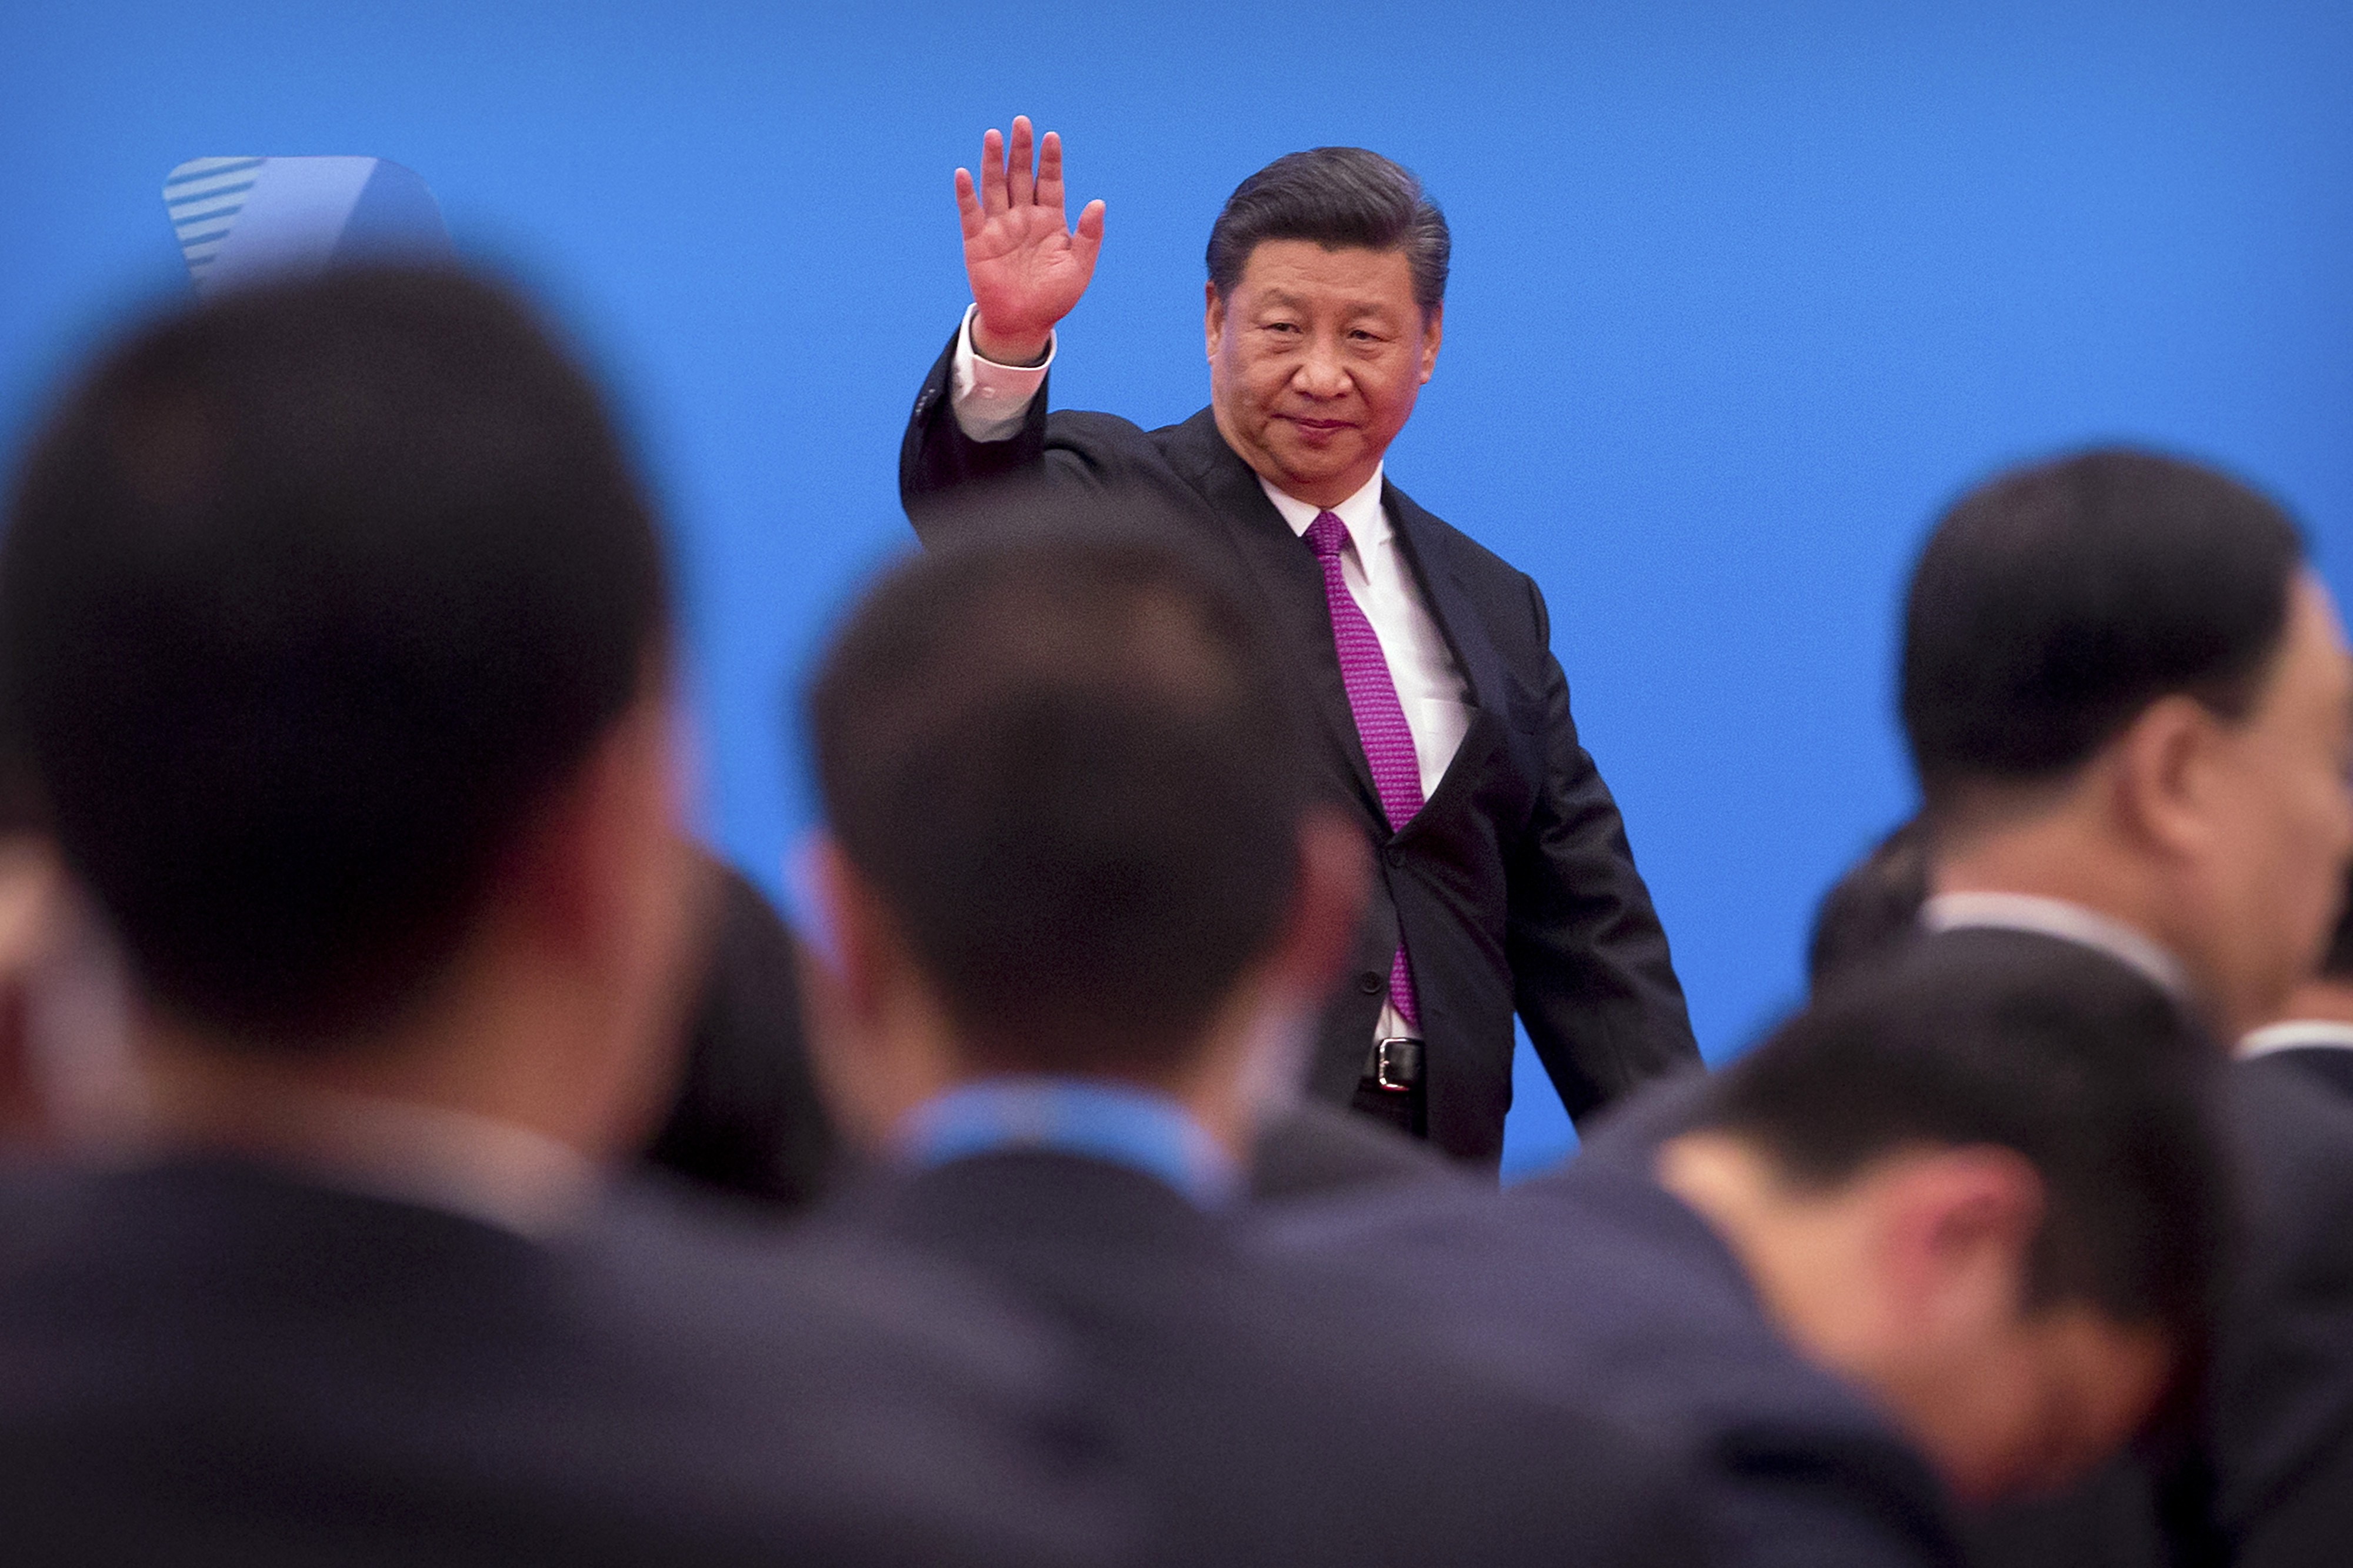 Xi Jinping waves as he leaves after a press conference at the closing of the Belt and Road Forum in Beijing on Saturday. Photo: AP